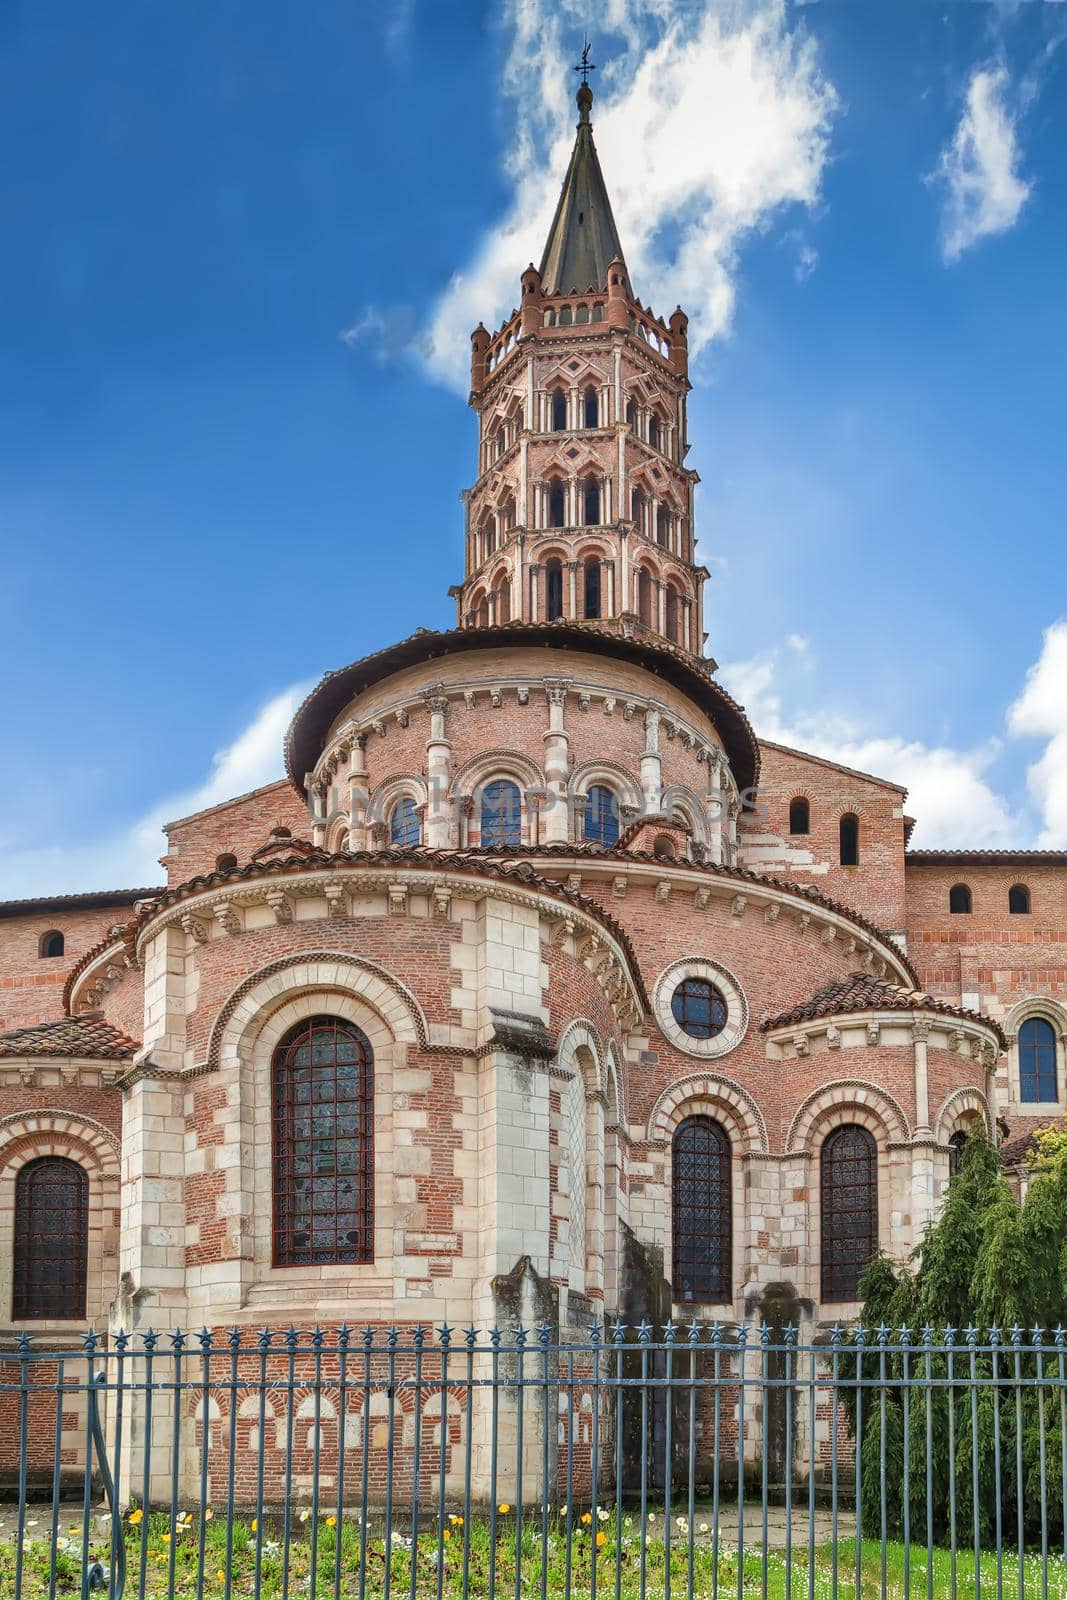 Basilica of Saint-Sernin is a church in Toulouse, France.  Constructed in the Romanesque style between about 1080 and 1120